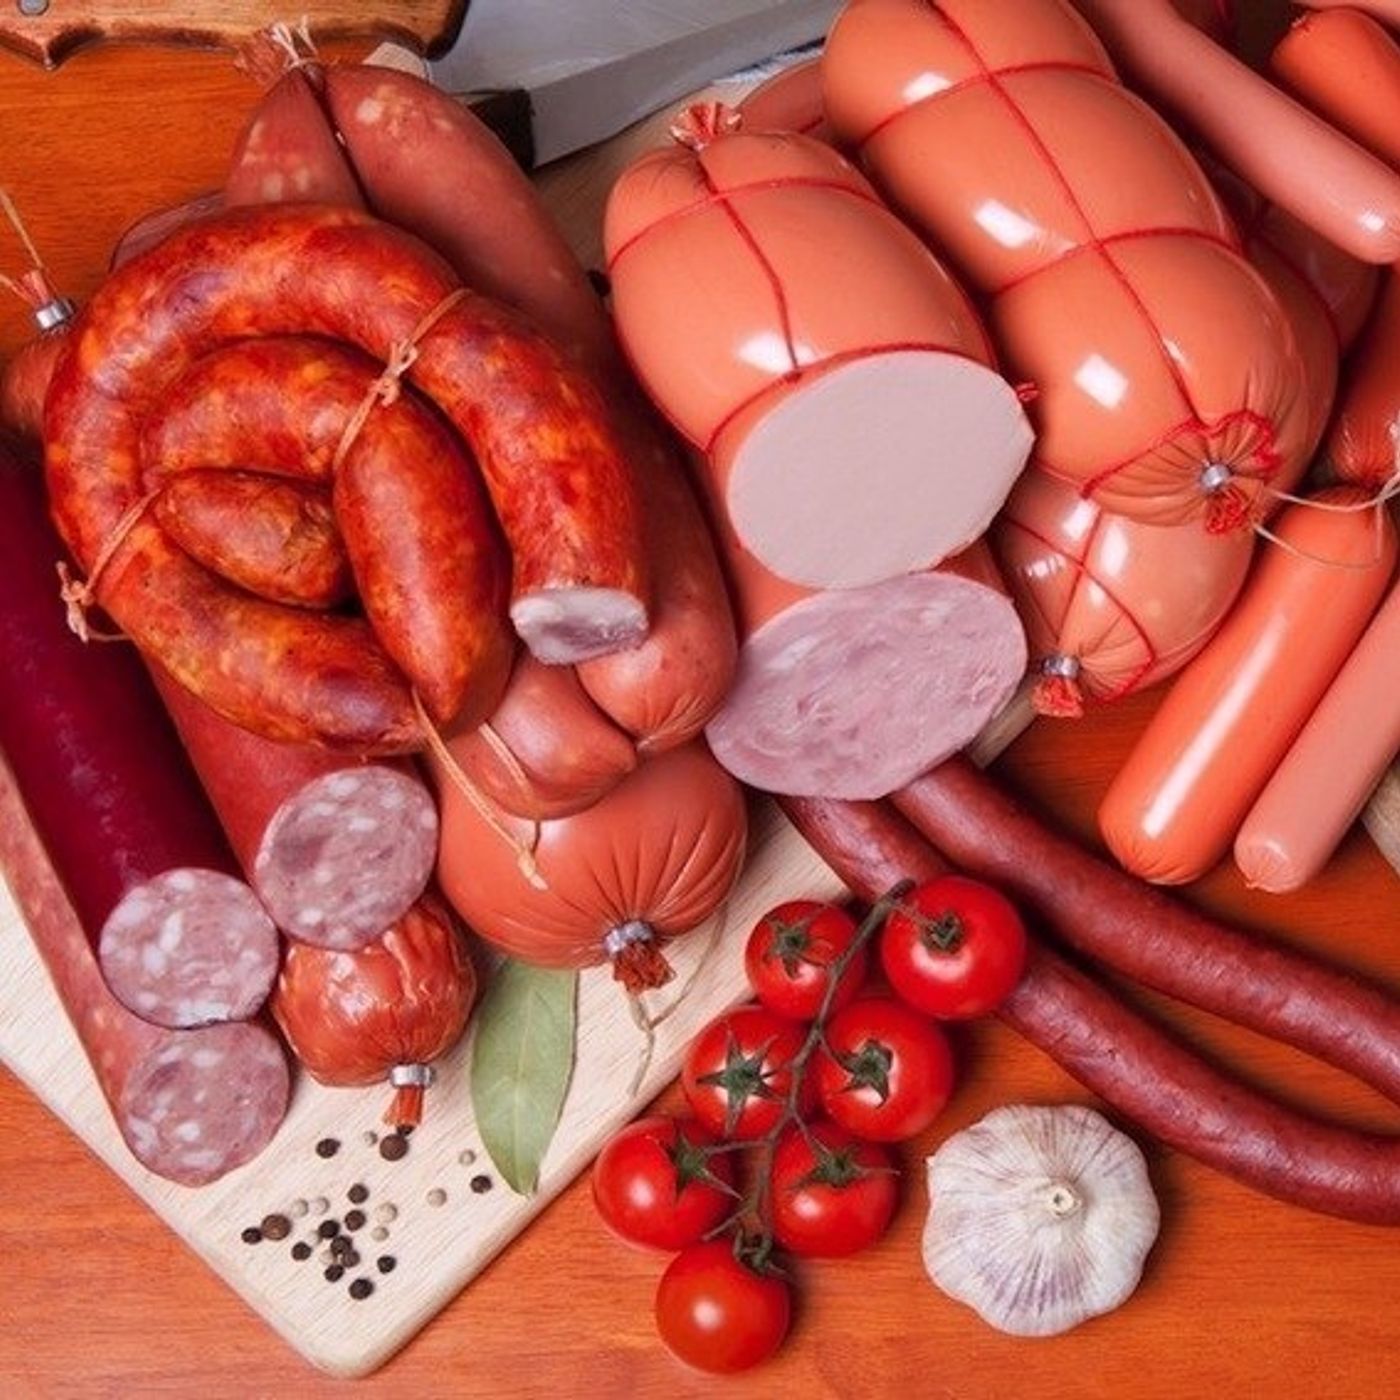 WHO Says Processed Meat Gives You Cancer - What Do You Think?